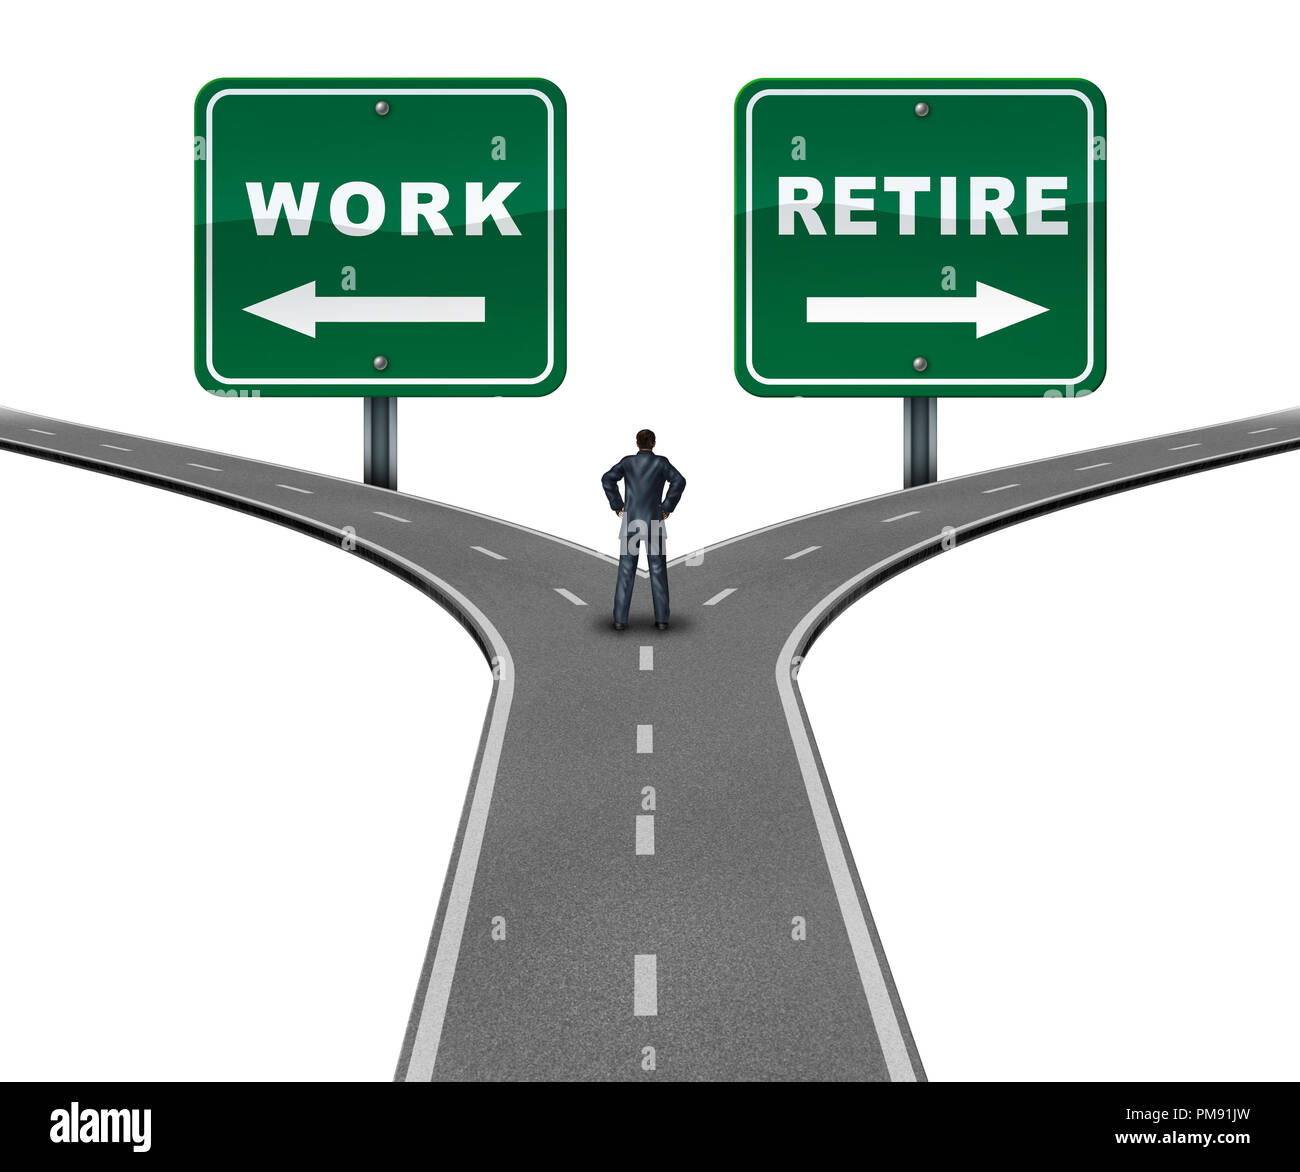 Work retire direction concept as a worker making a decision to continue working or retiring with 3D illustration elements. Stock Photo